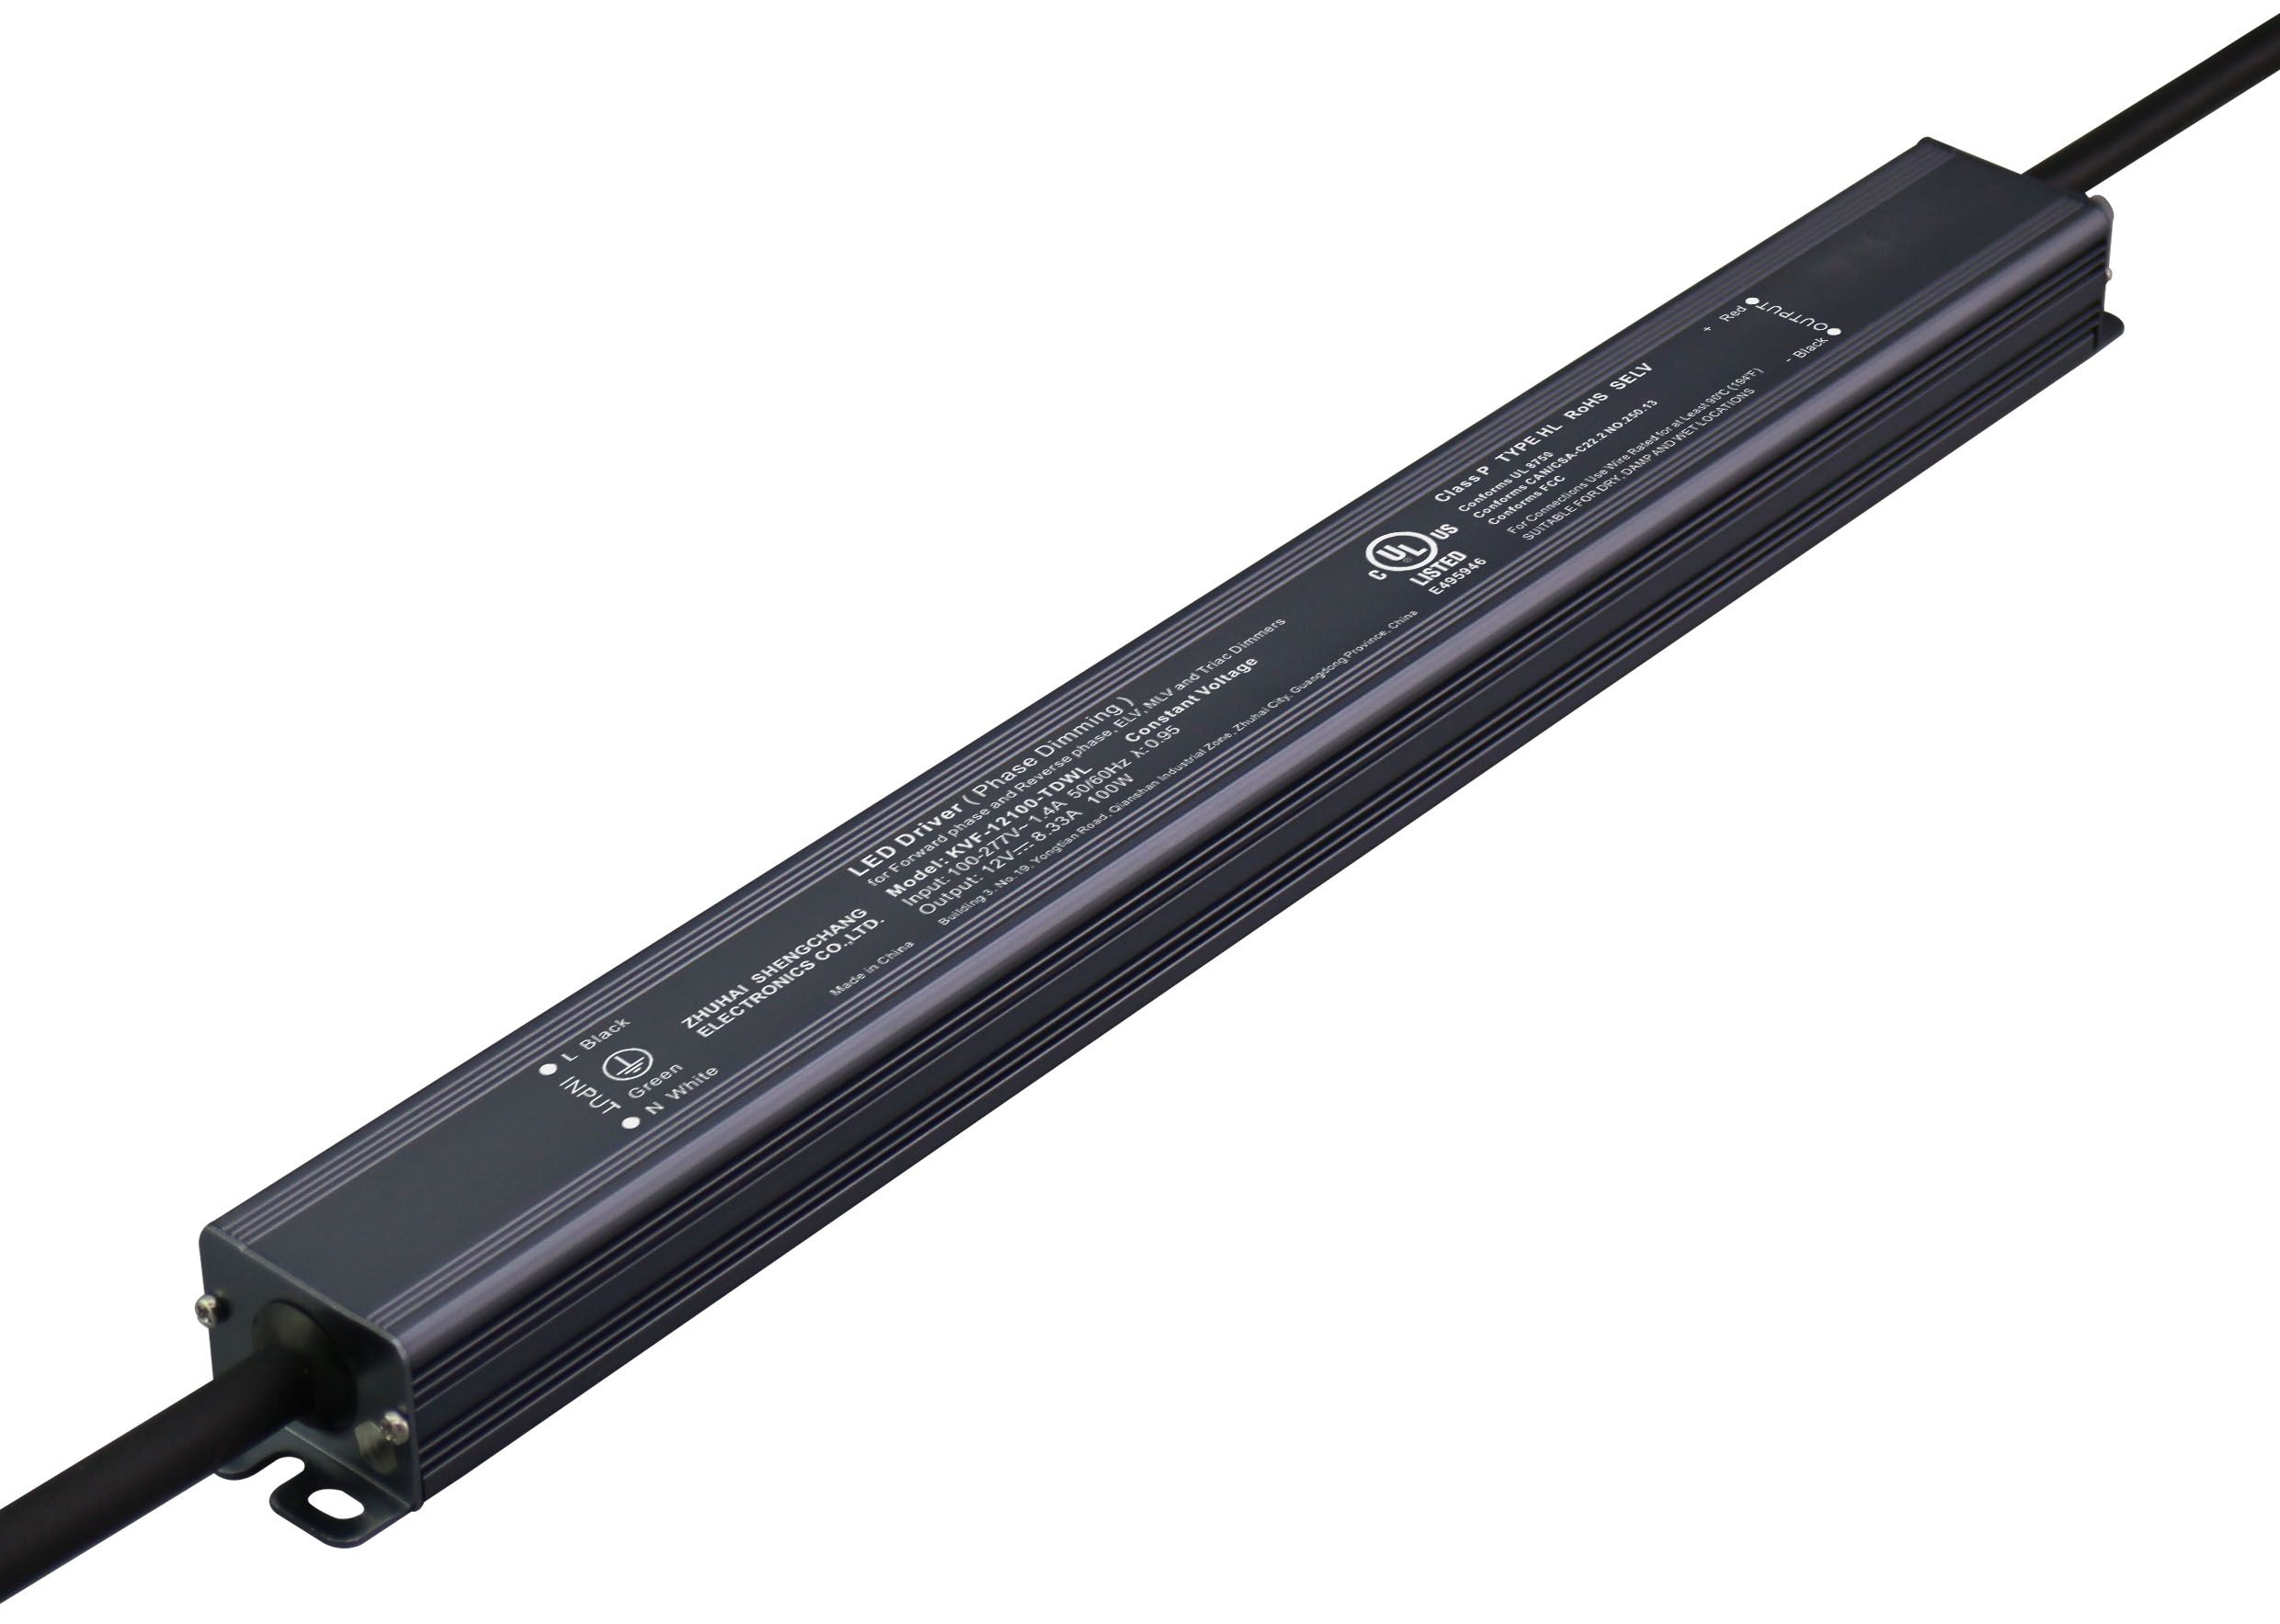 KVF-TDWL Series 150W Constant Voltage Triac Dimmable LED driver